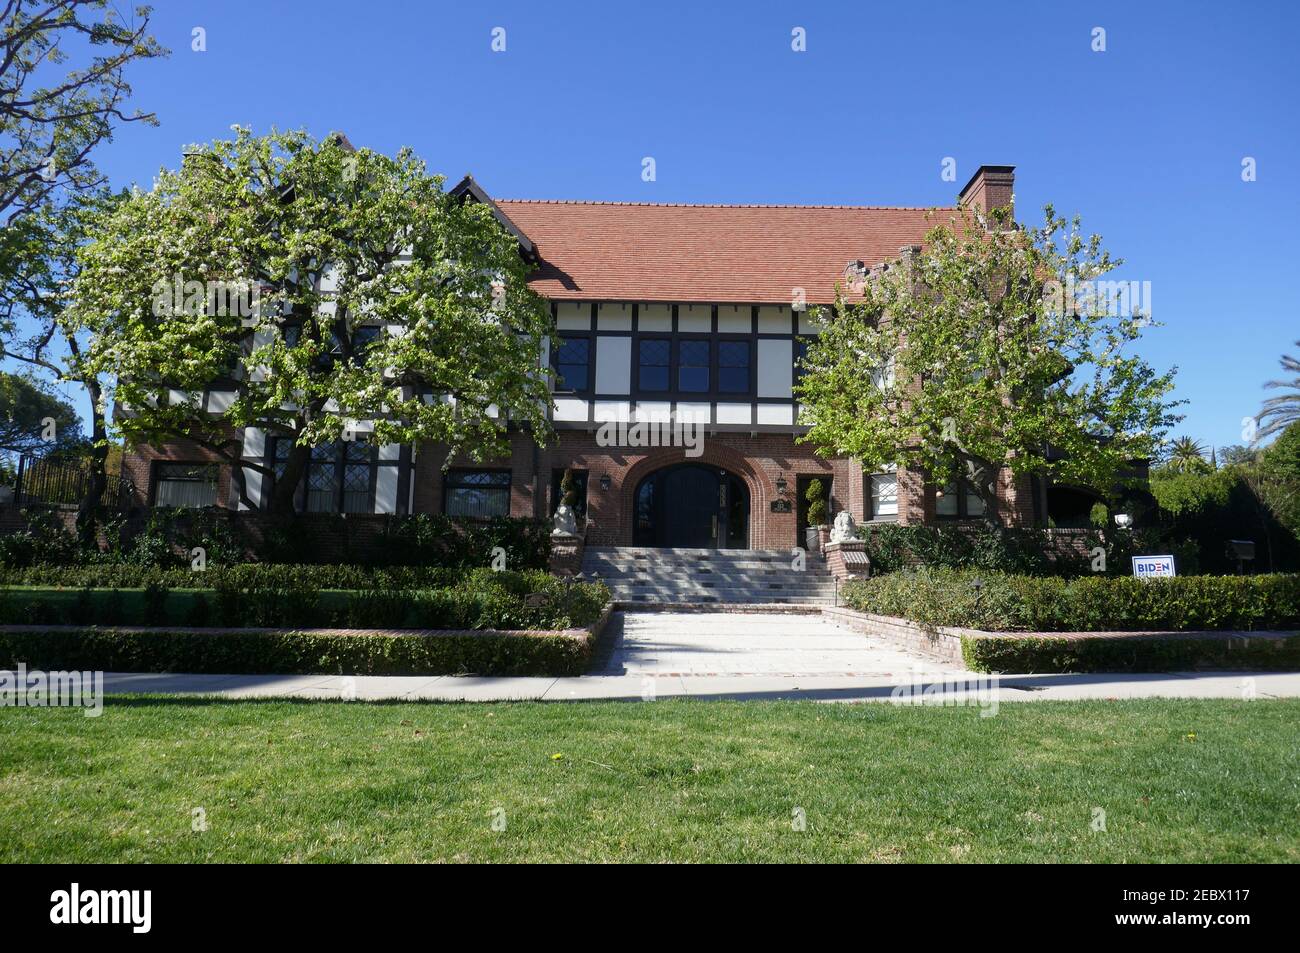 Los Angeles, California, USA 12th February 2021 A general view of atmosphere of Wrigley House at 553 S. Windsor Blvd on February 12, 2021 in Los Angeles, California, USA. Photo by Barry King/Alamy Stock Photo Stock Photo